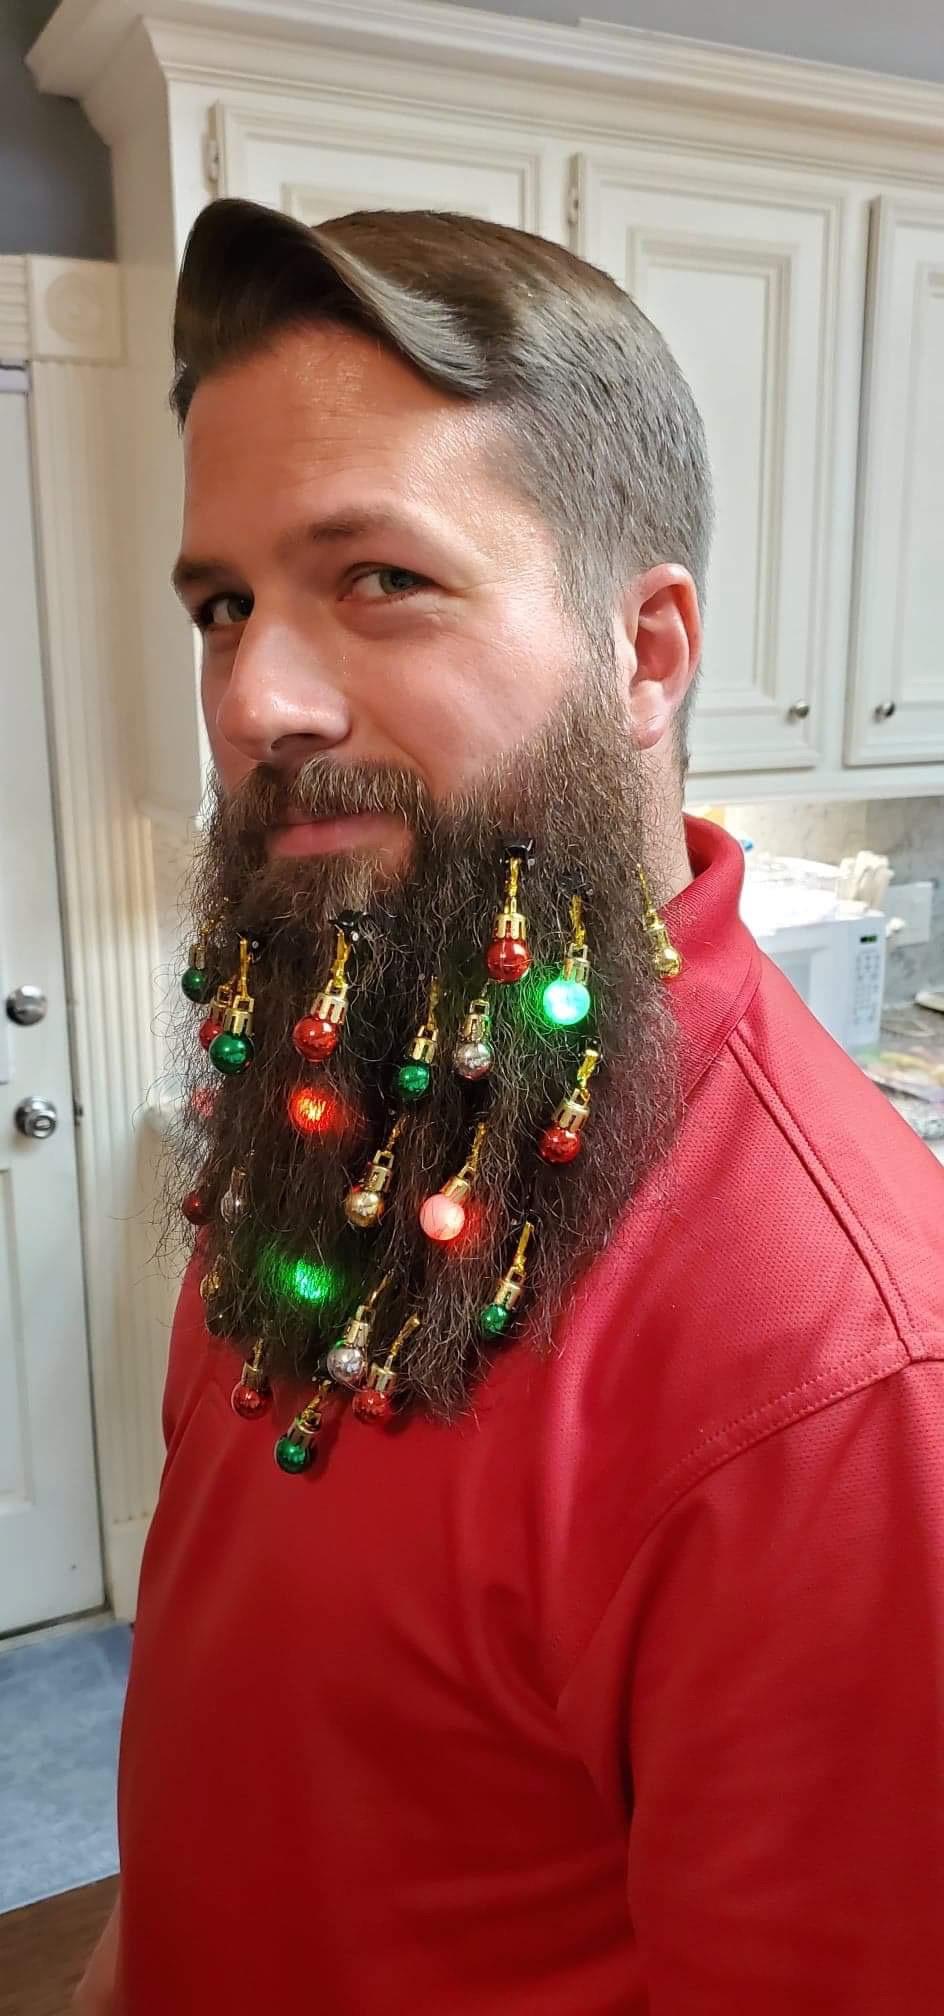 Beard Ornaments - Colorful Christmas Facial Hair Baubles! photo review